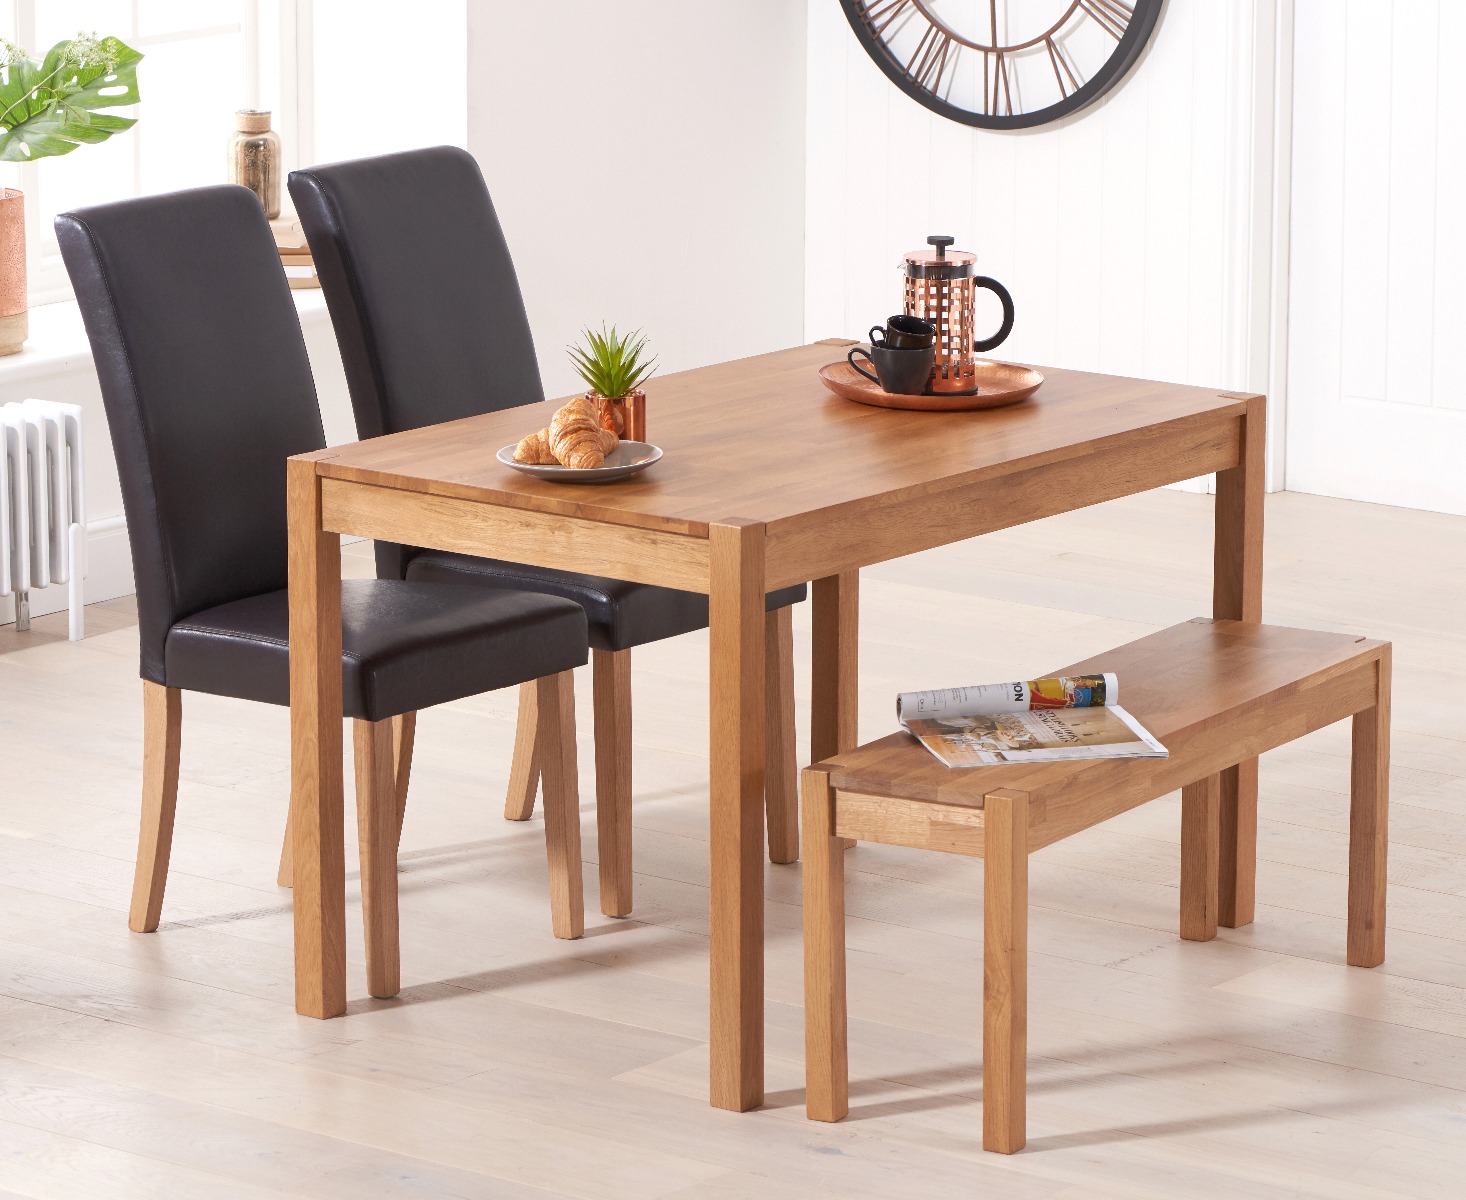 Photo 1 of York 120cm solid oak dining table with 4 brown olivia chairs with 2 oak benches